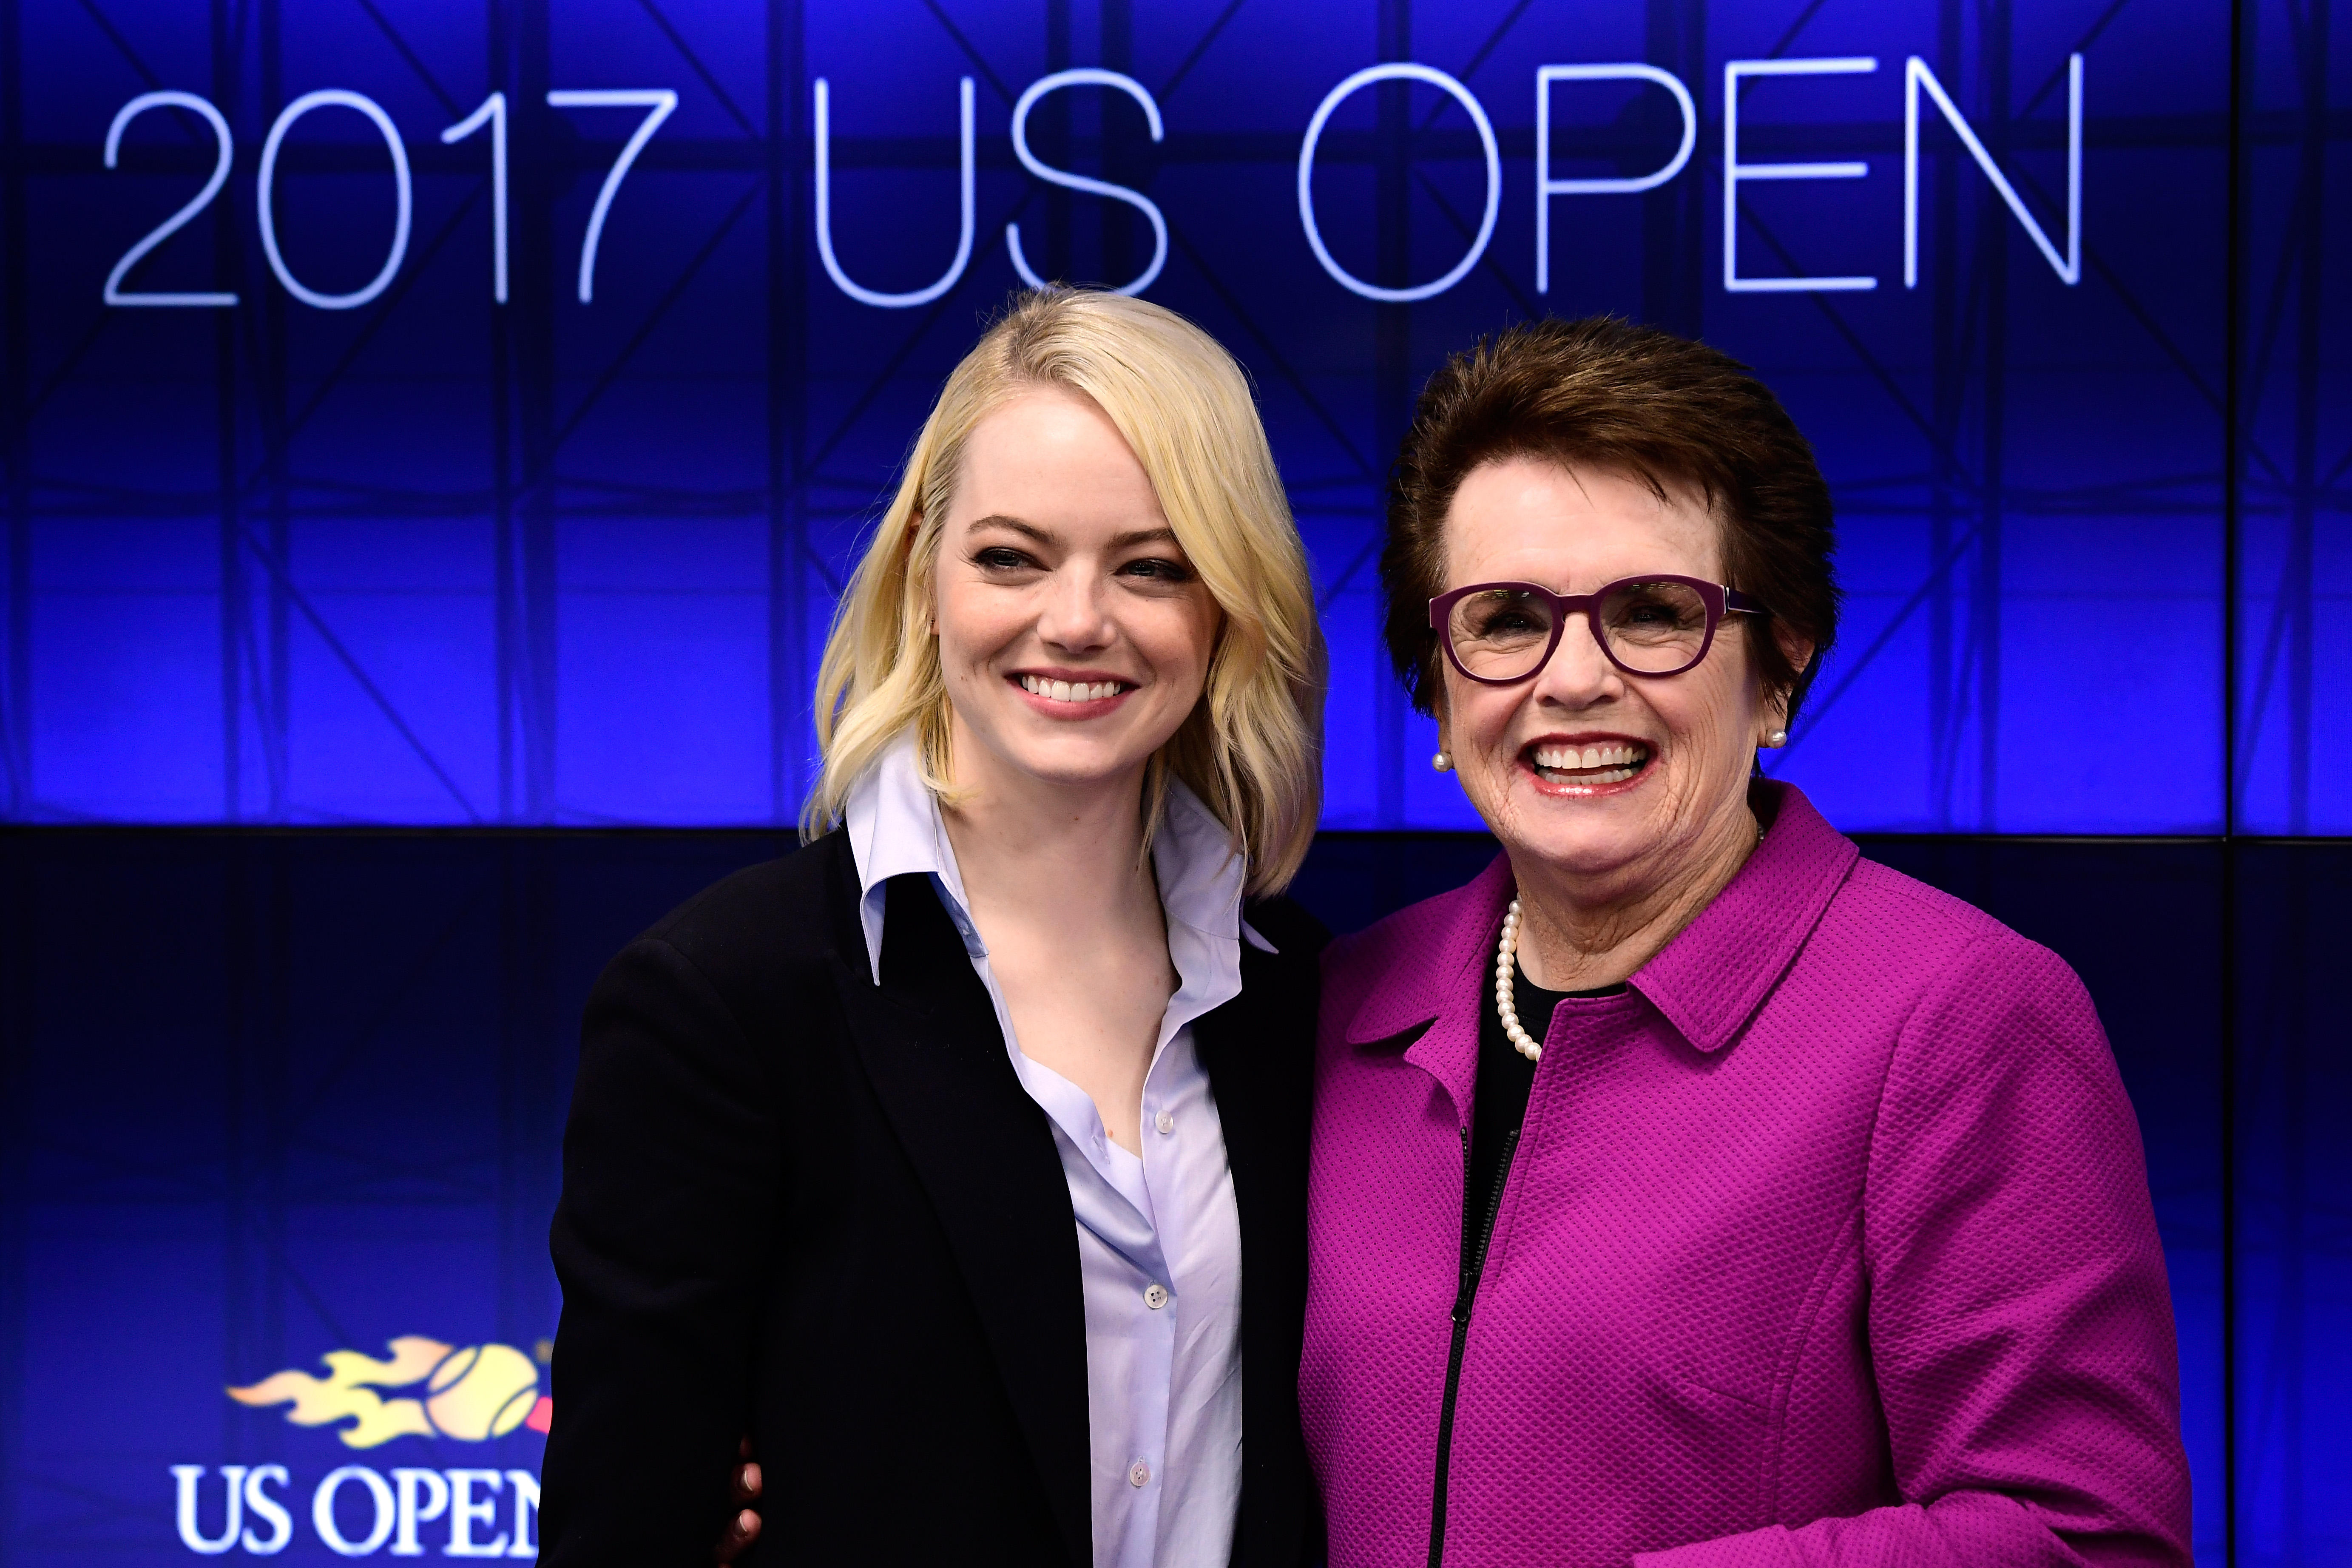 Battle of the Sexes 45 Years on: Billie Jean King Continues the